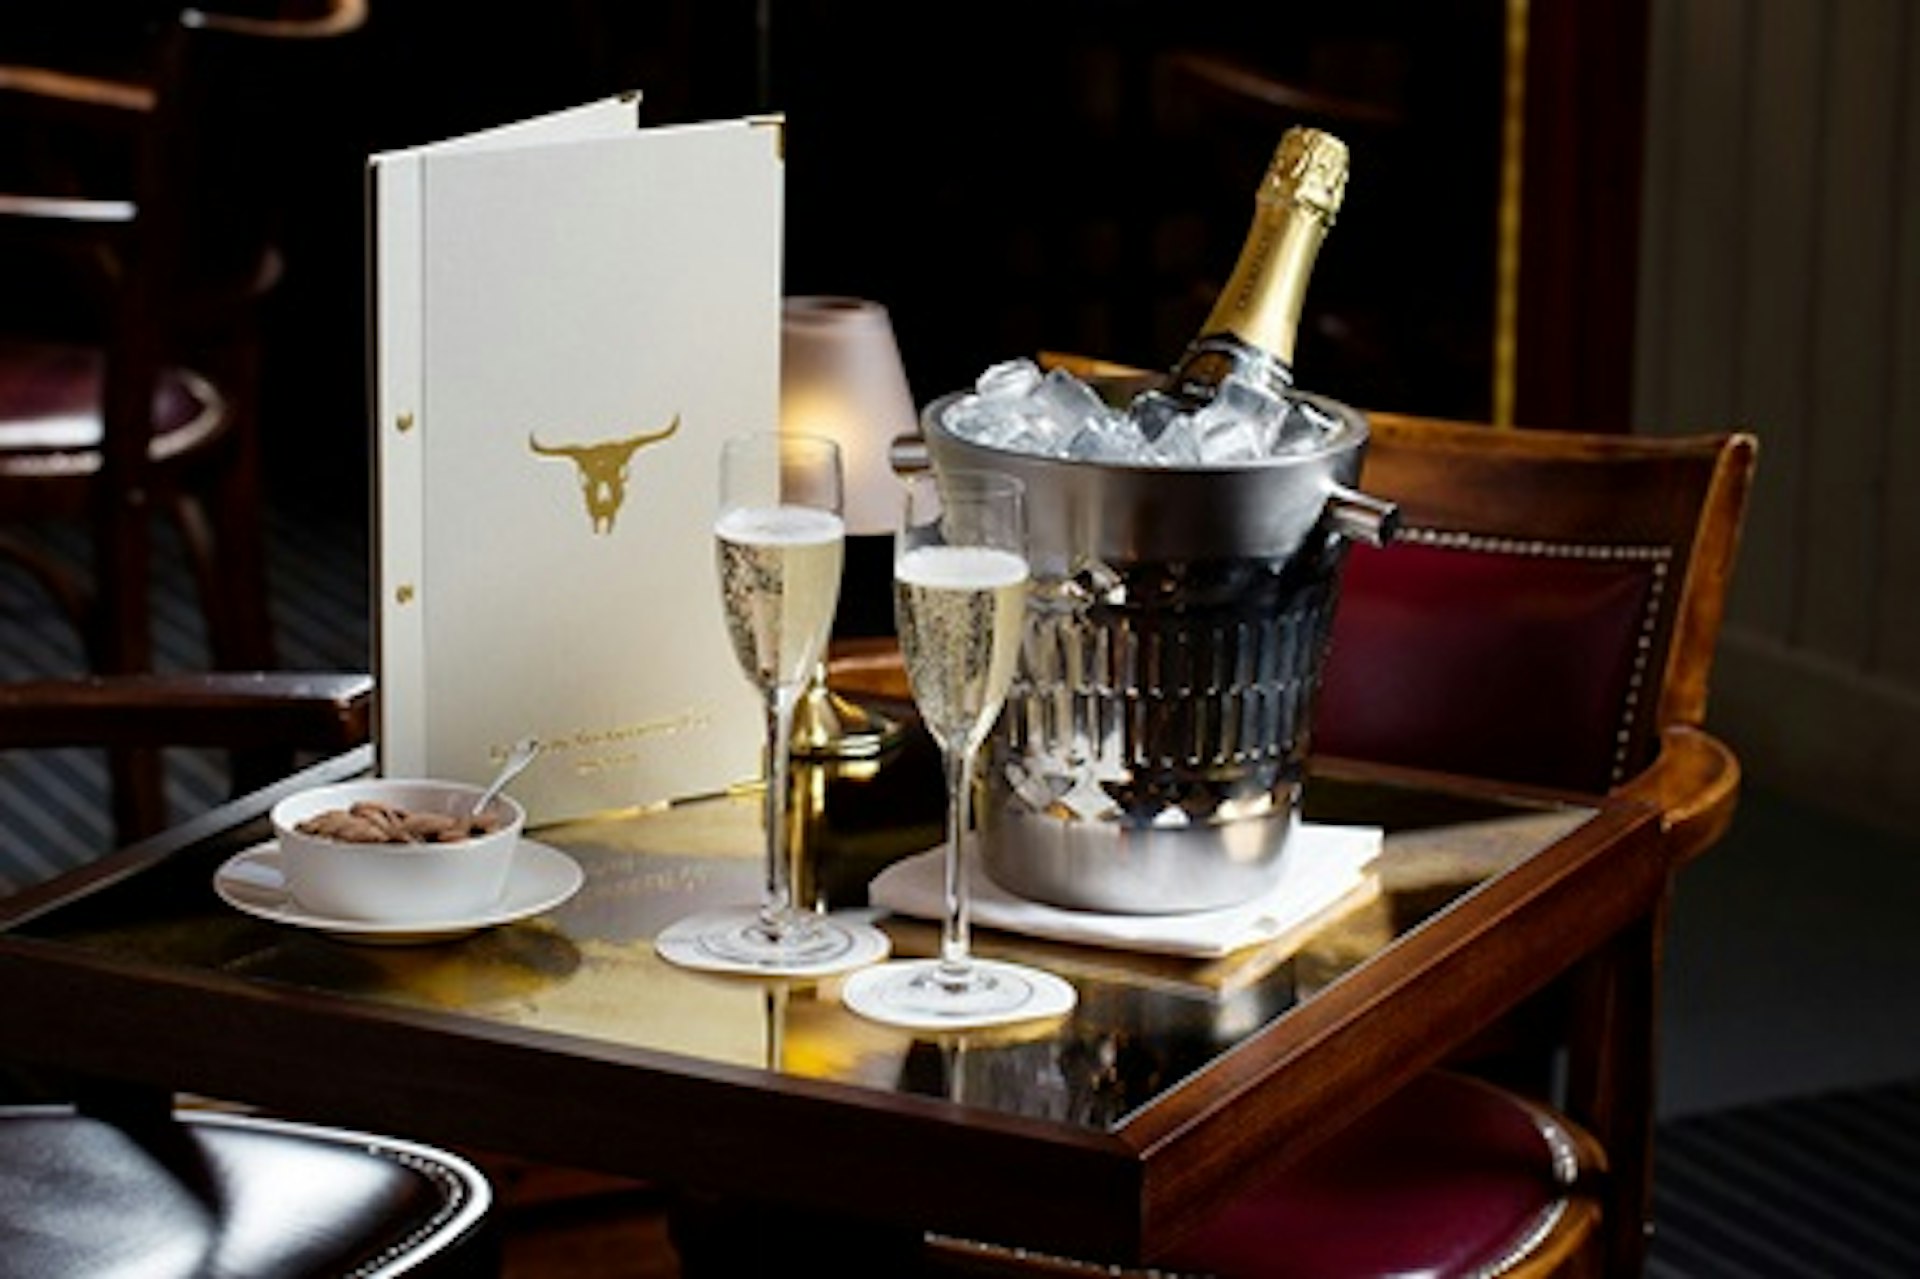 Three Course Champagne Celebration Dining with Sides for Two at Marco Pierre White's London Steakhouse Co